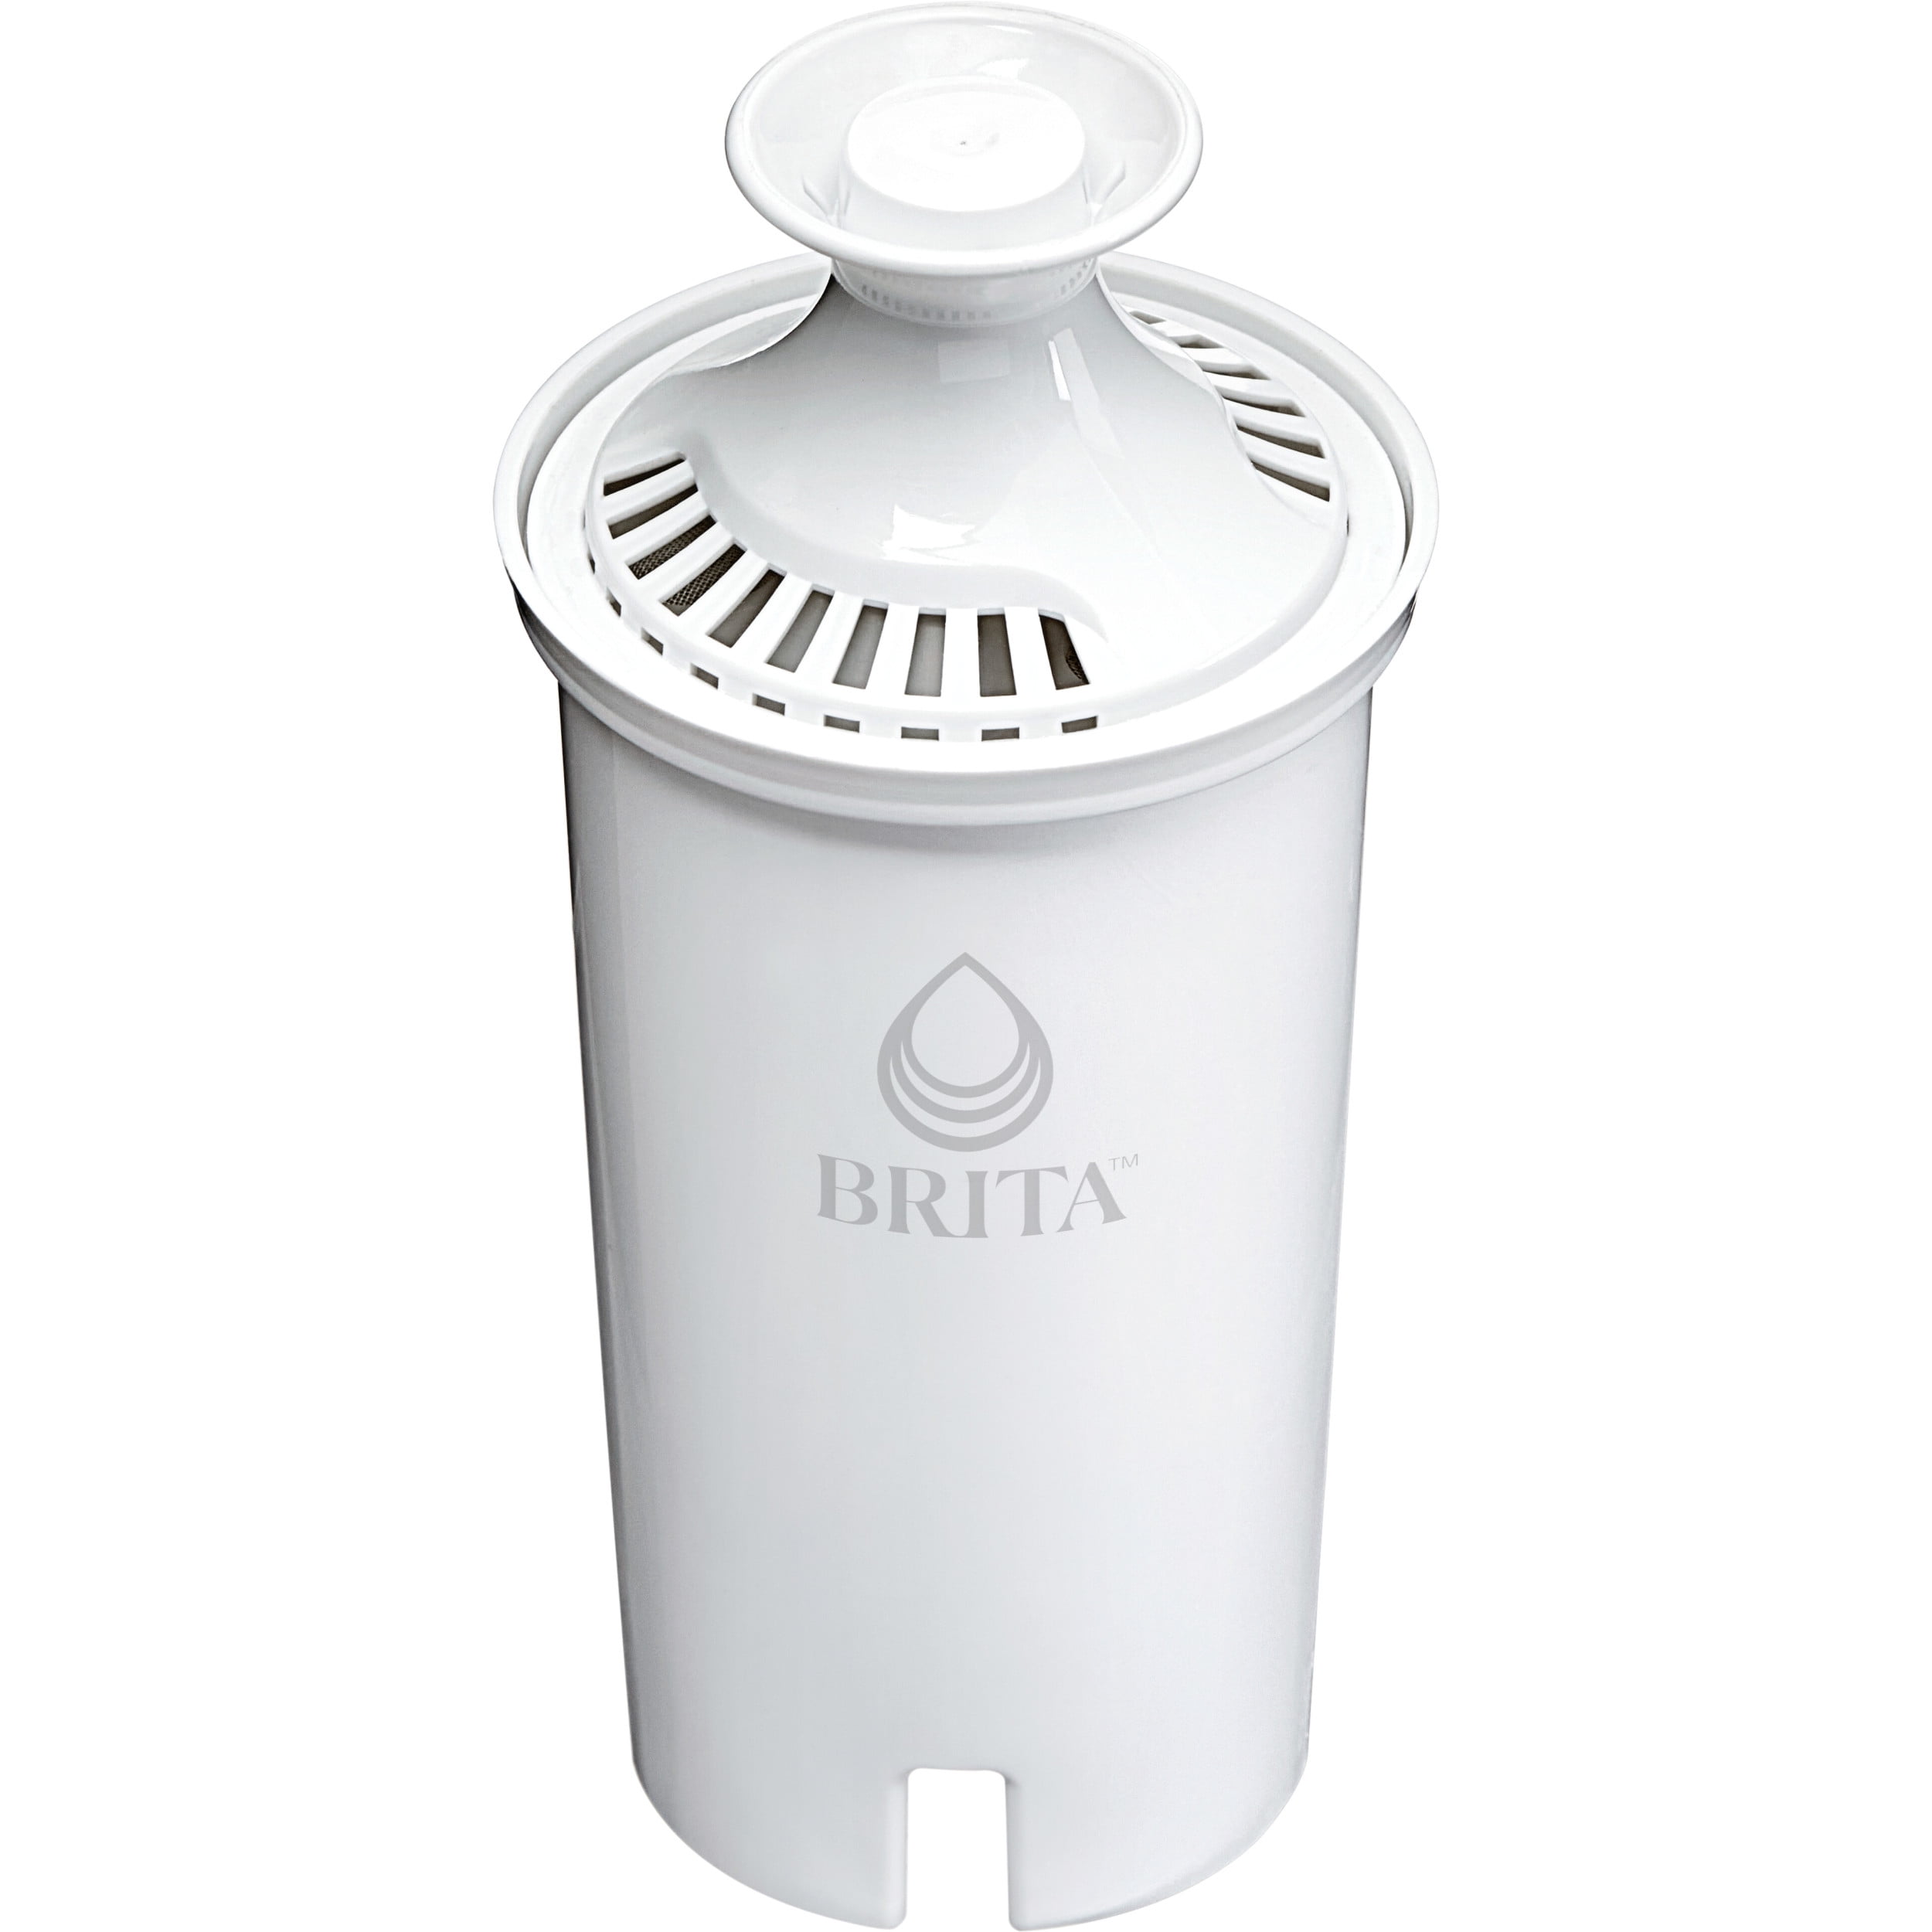 Brita Standard Water Filter, Replacement Filters for Pitchers and